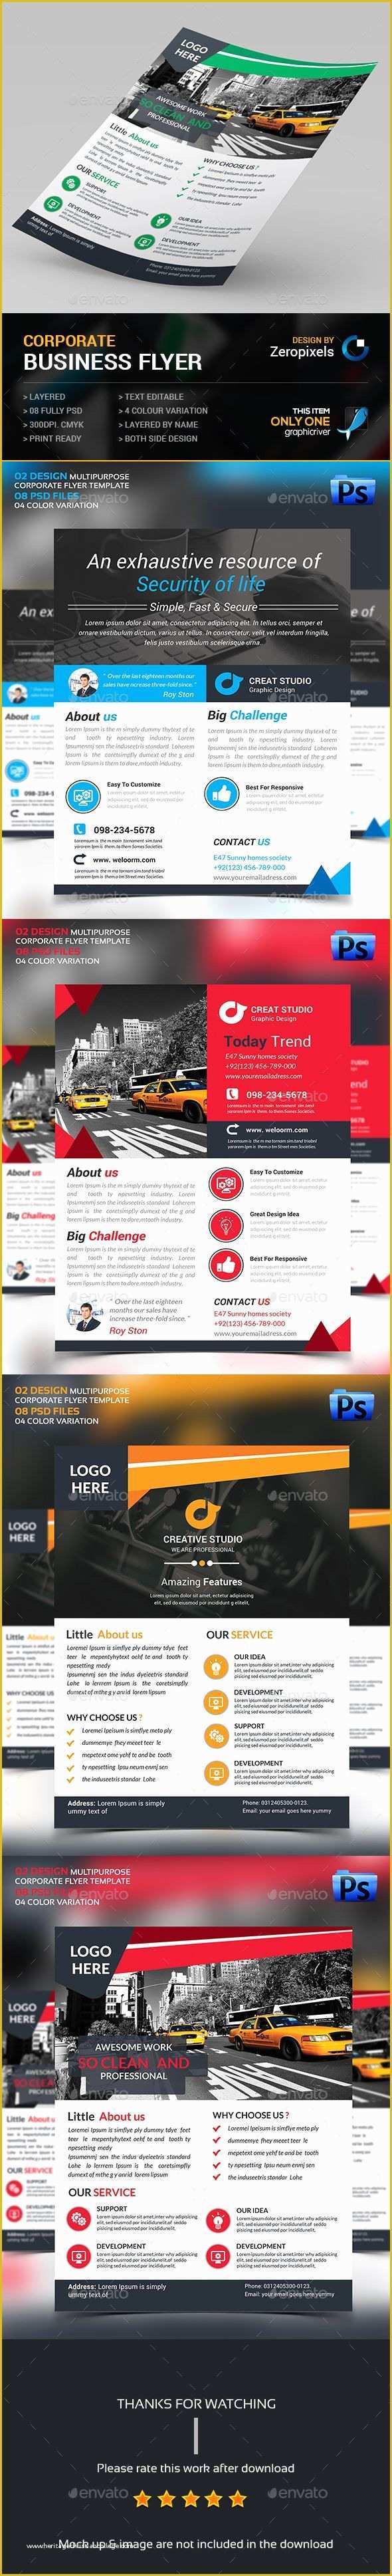 Bourne Identity Style Free after Effects Template Of 1000 Ideas About Business Flyers On Pinterest